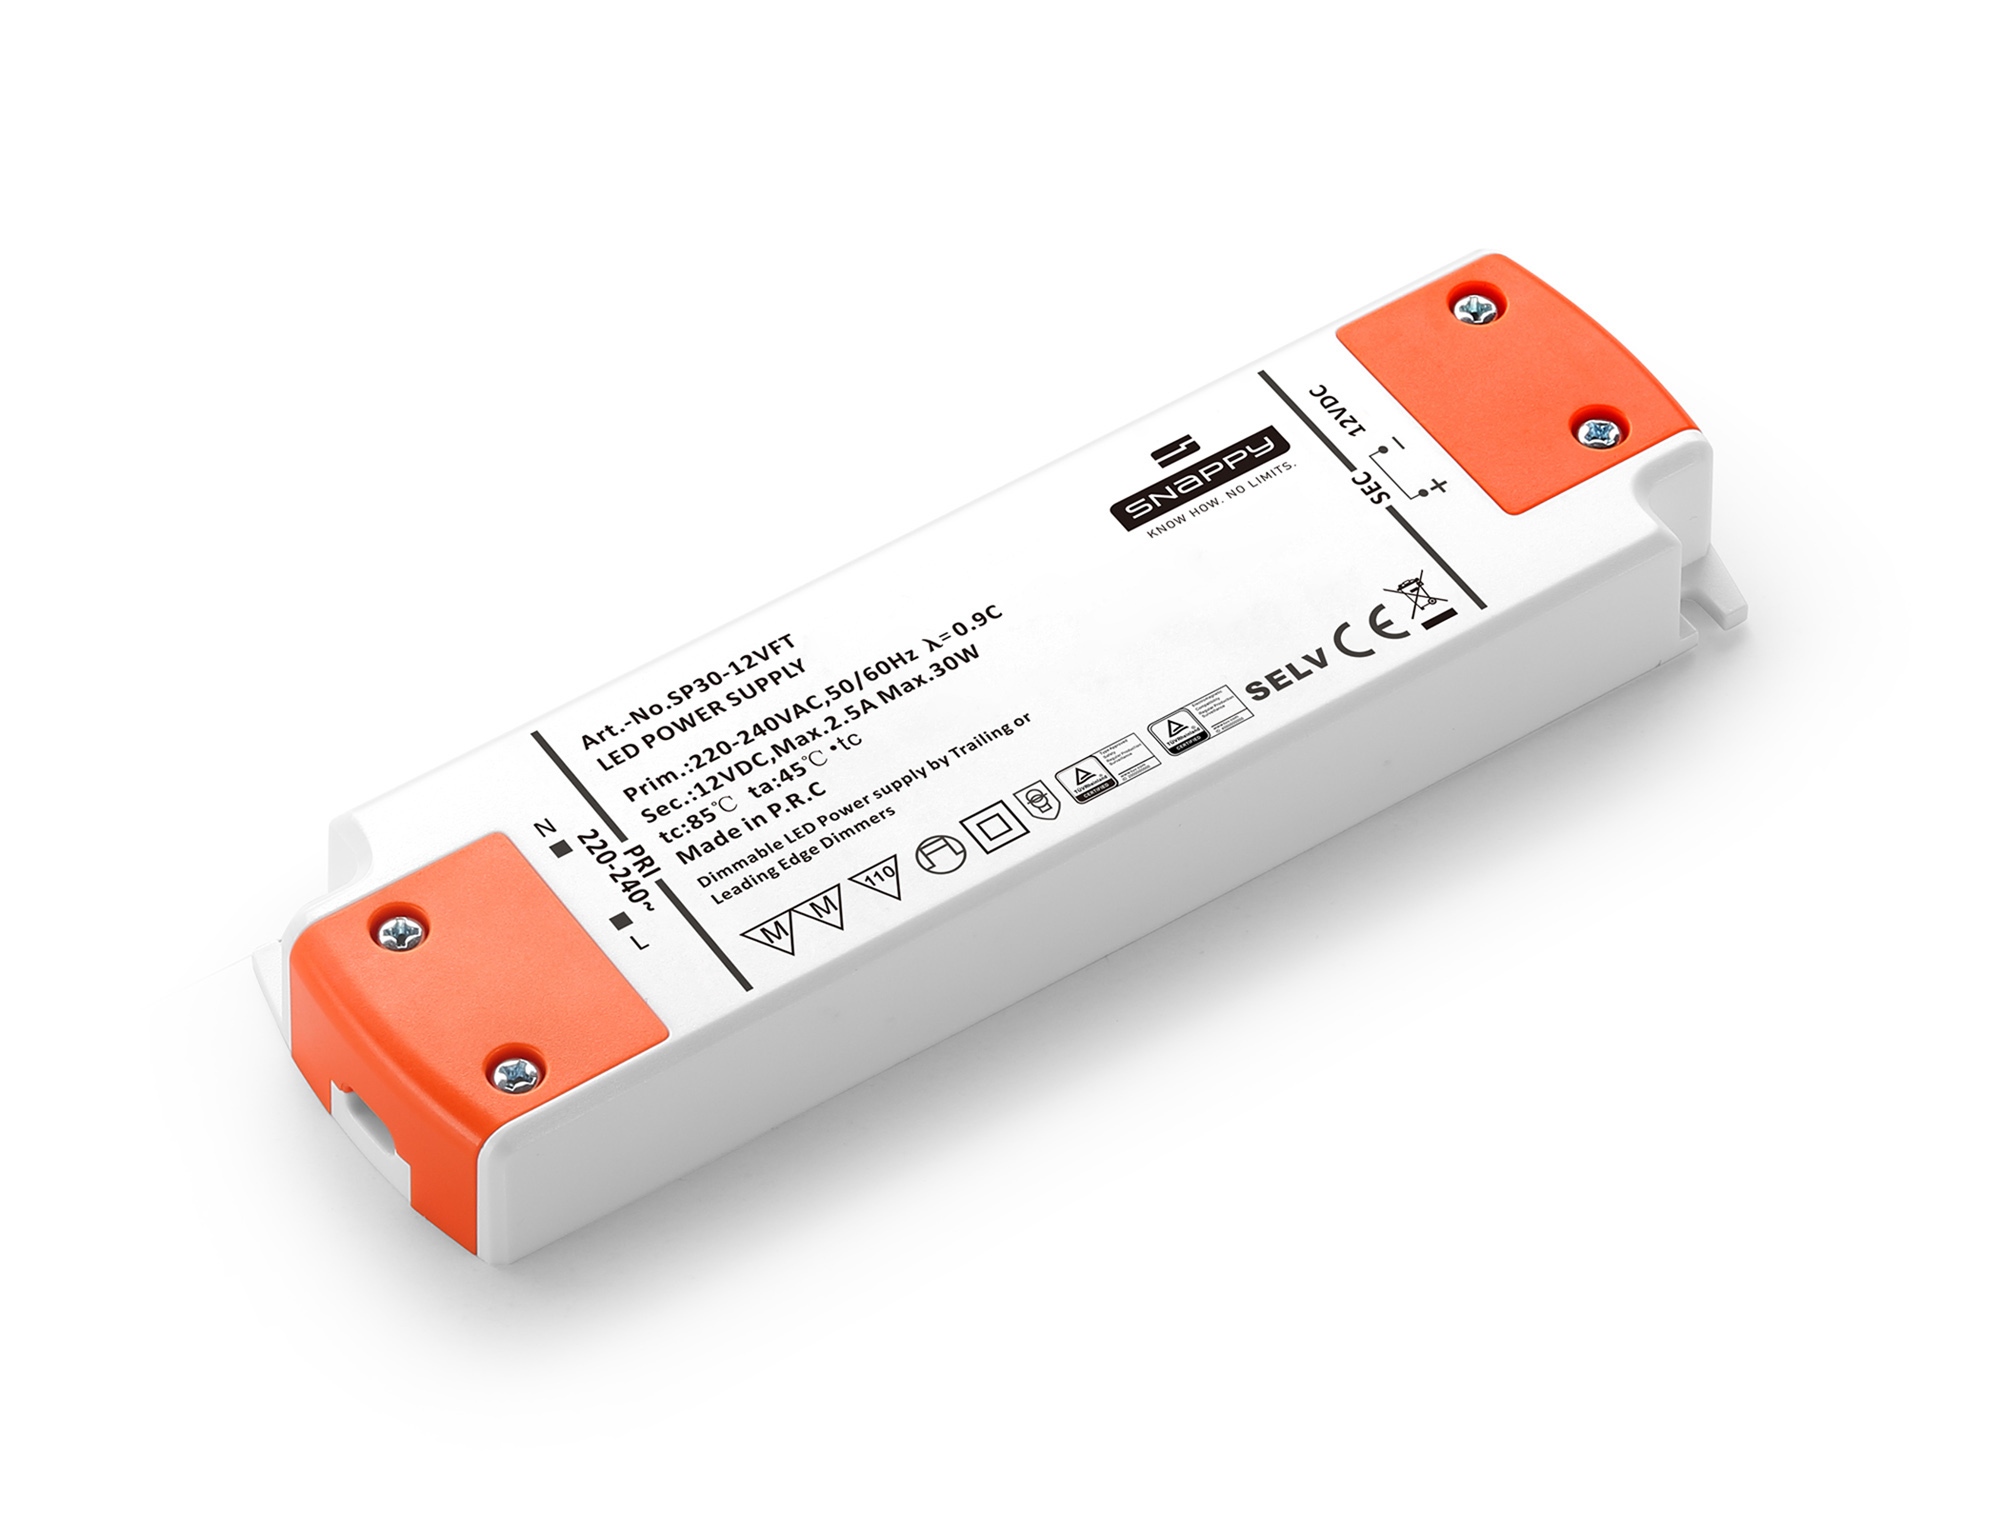 SP30-12VFT  SP, 30W, Constant Voltage Triac Dimmable PC LED Driver, 12VDC, 2.5A, Pf>0.9, TC:+85?, TA:45?, IP20, Efficiency >80%, Screw Connection, 3yrs Warranty.